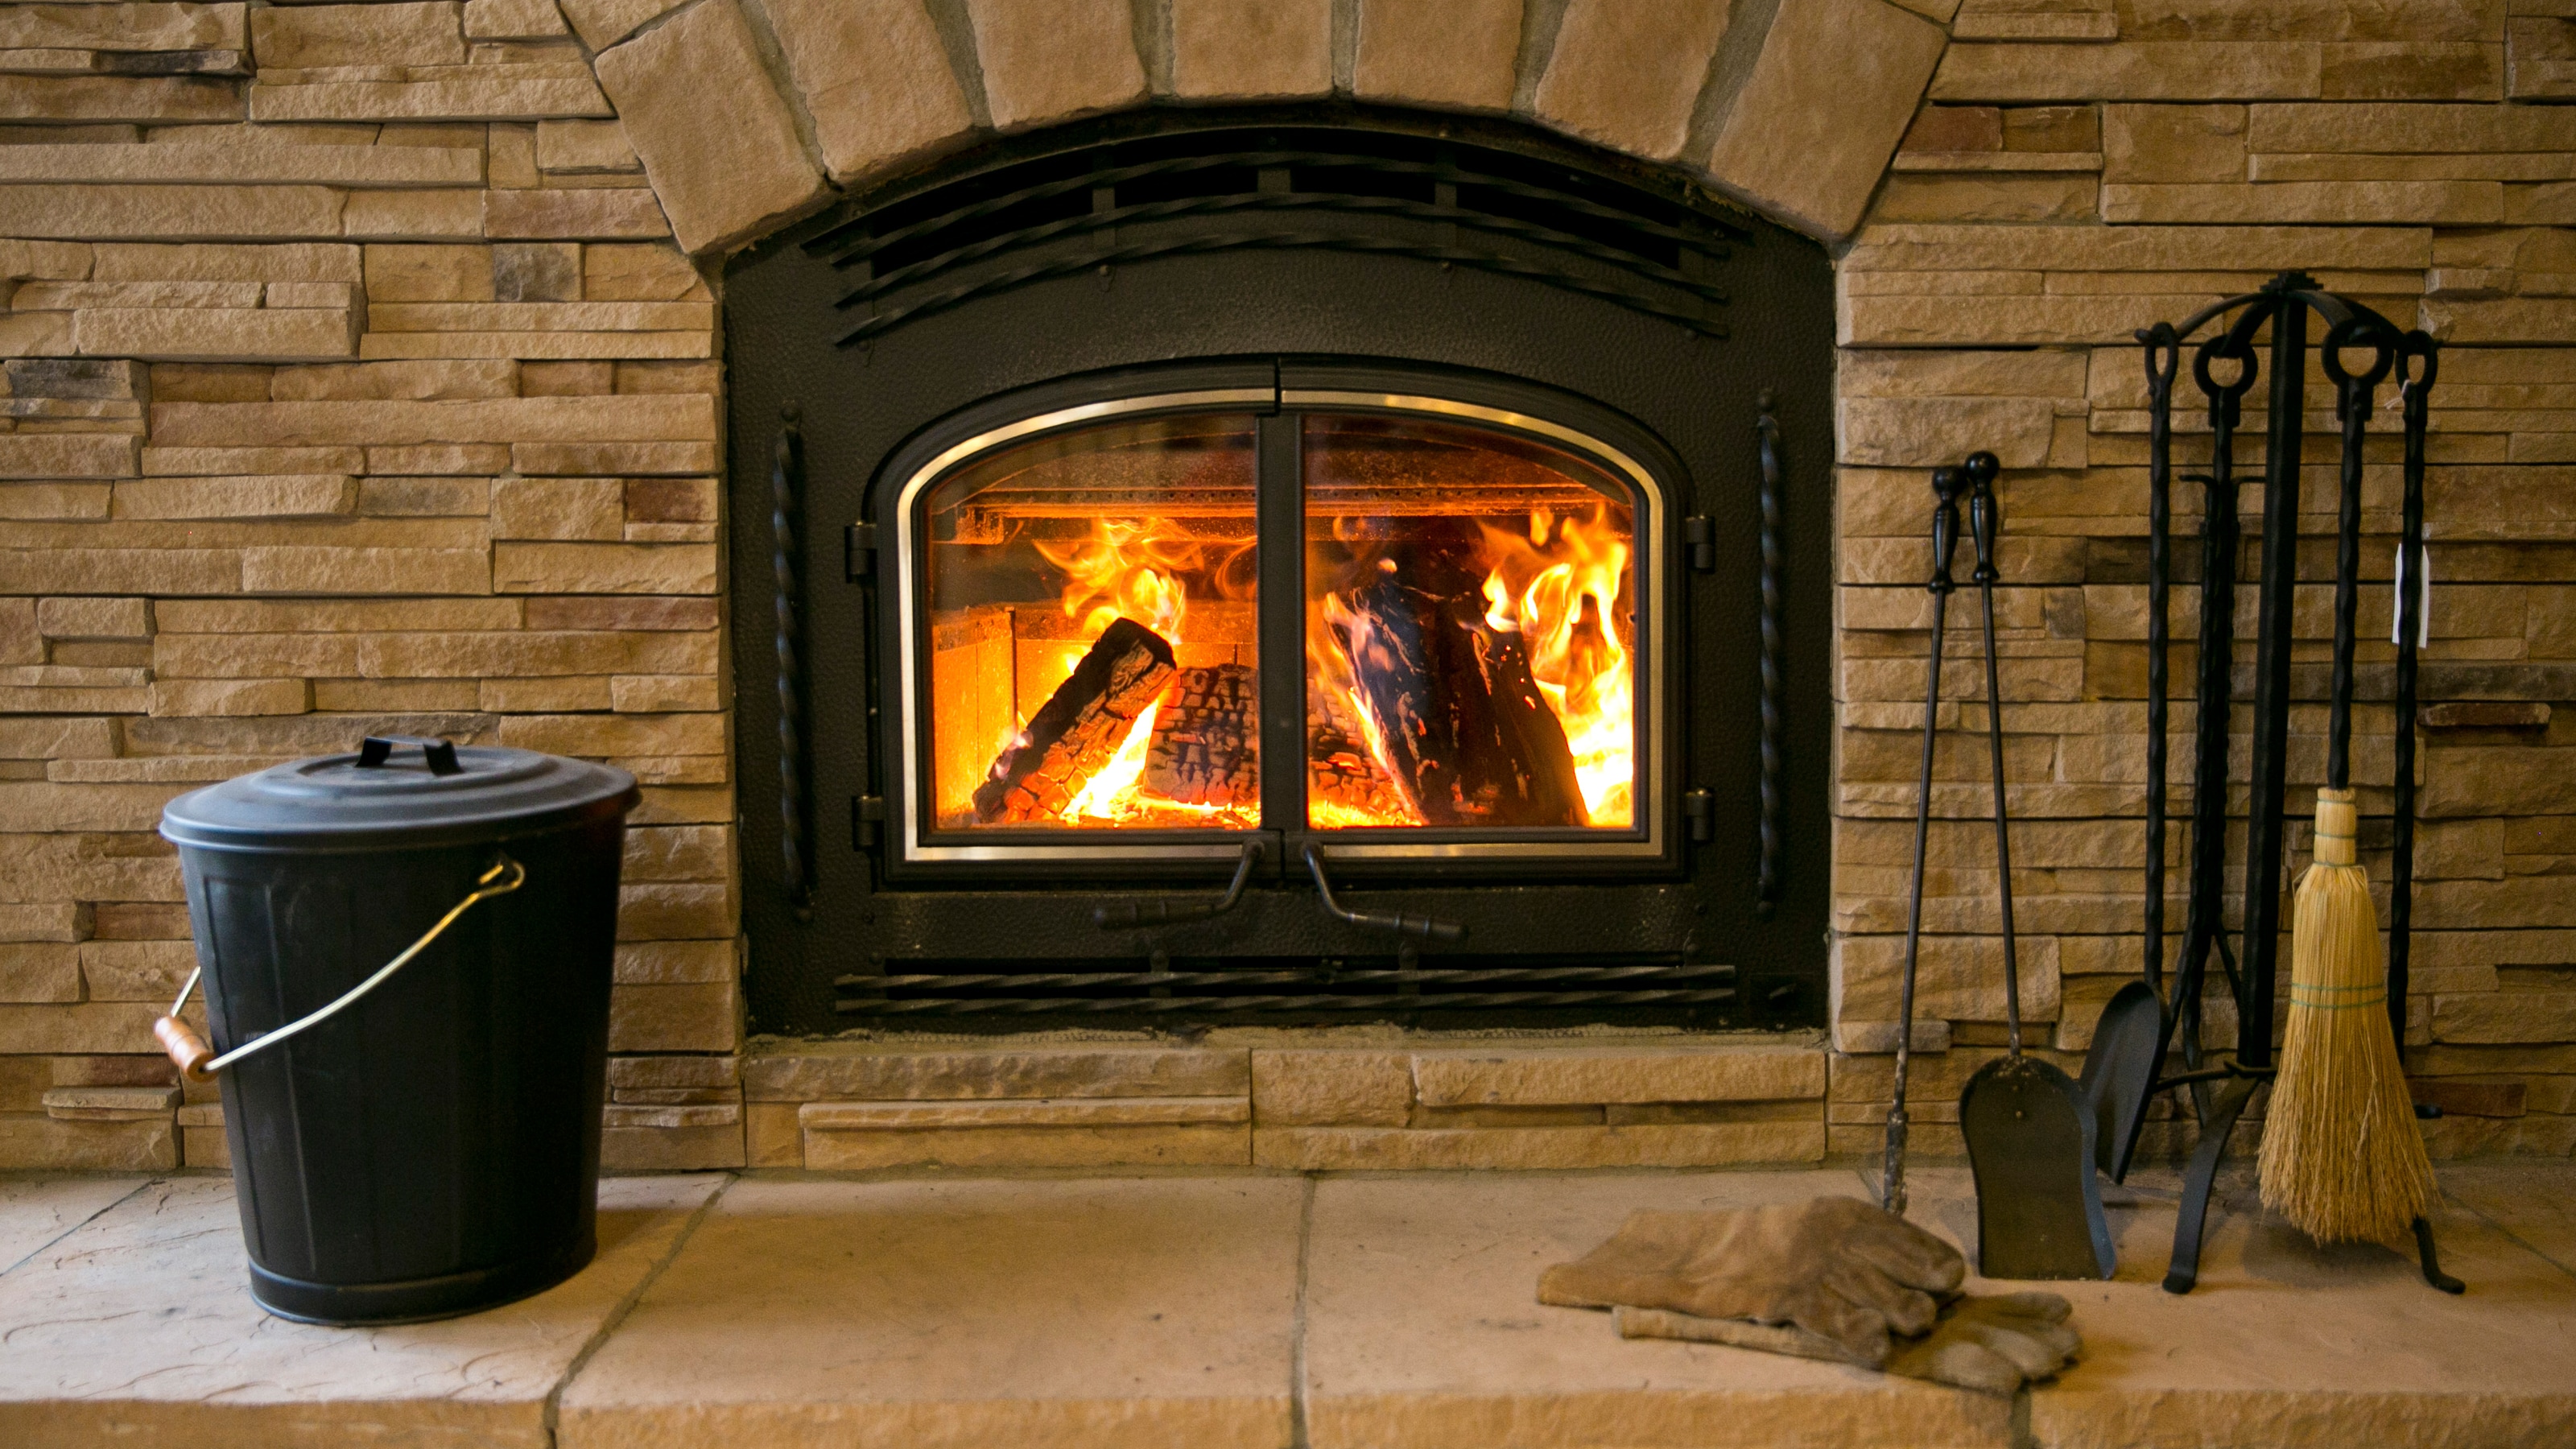 Glass Gas Fireplace Insert Awesome How to Convert A Gas Fireplace to Wood Burning